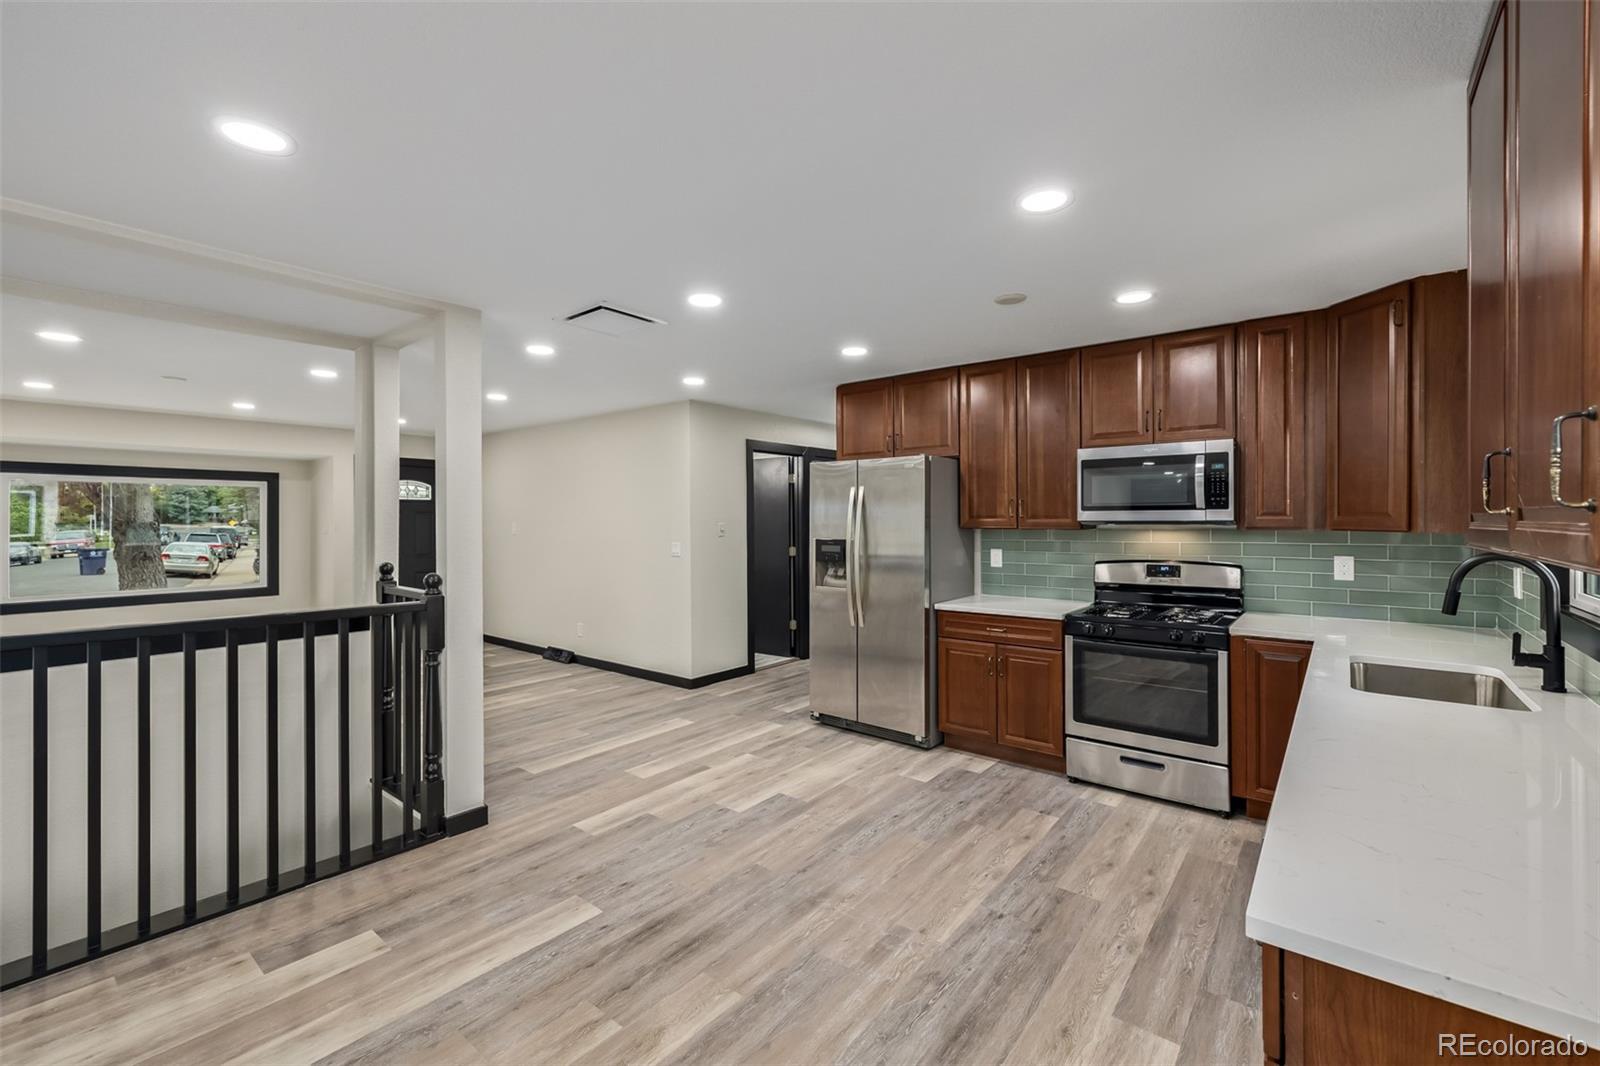 a kitchen with stainless steel appliances granite countertop a refrigerator a stove top oven a sink dishwasher and wooden cabinets with wooden floor